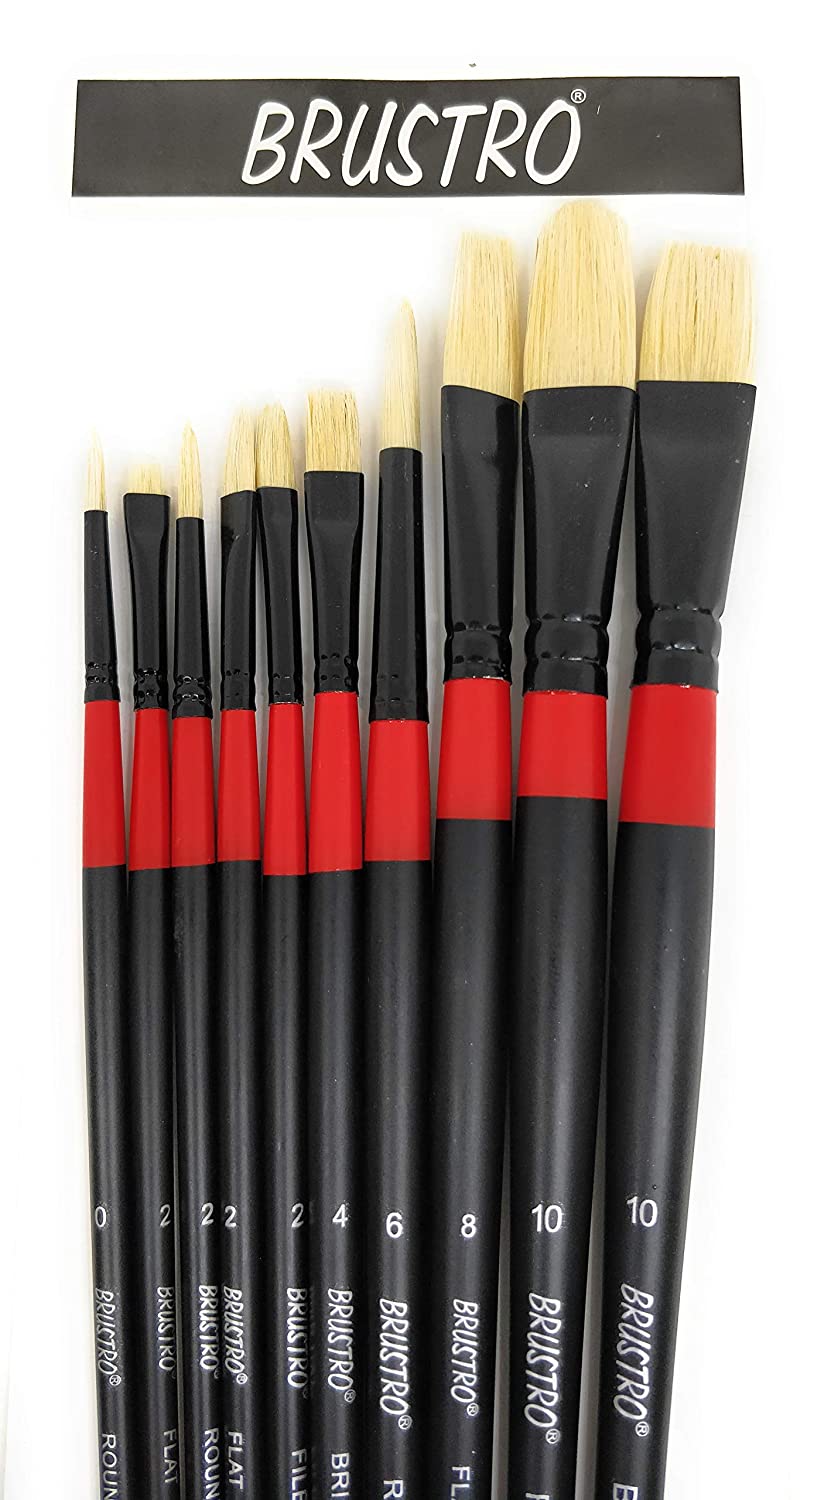 BRUSTRO Artists White Bristle Set of 10 Brushes for Oil and Acrylic.